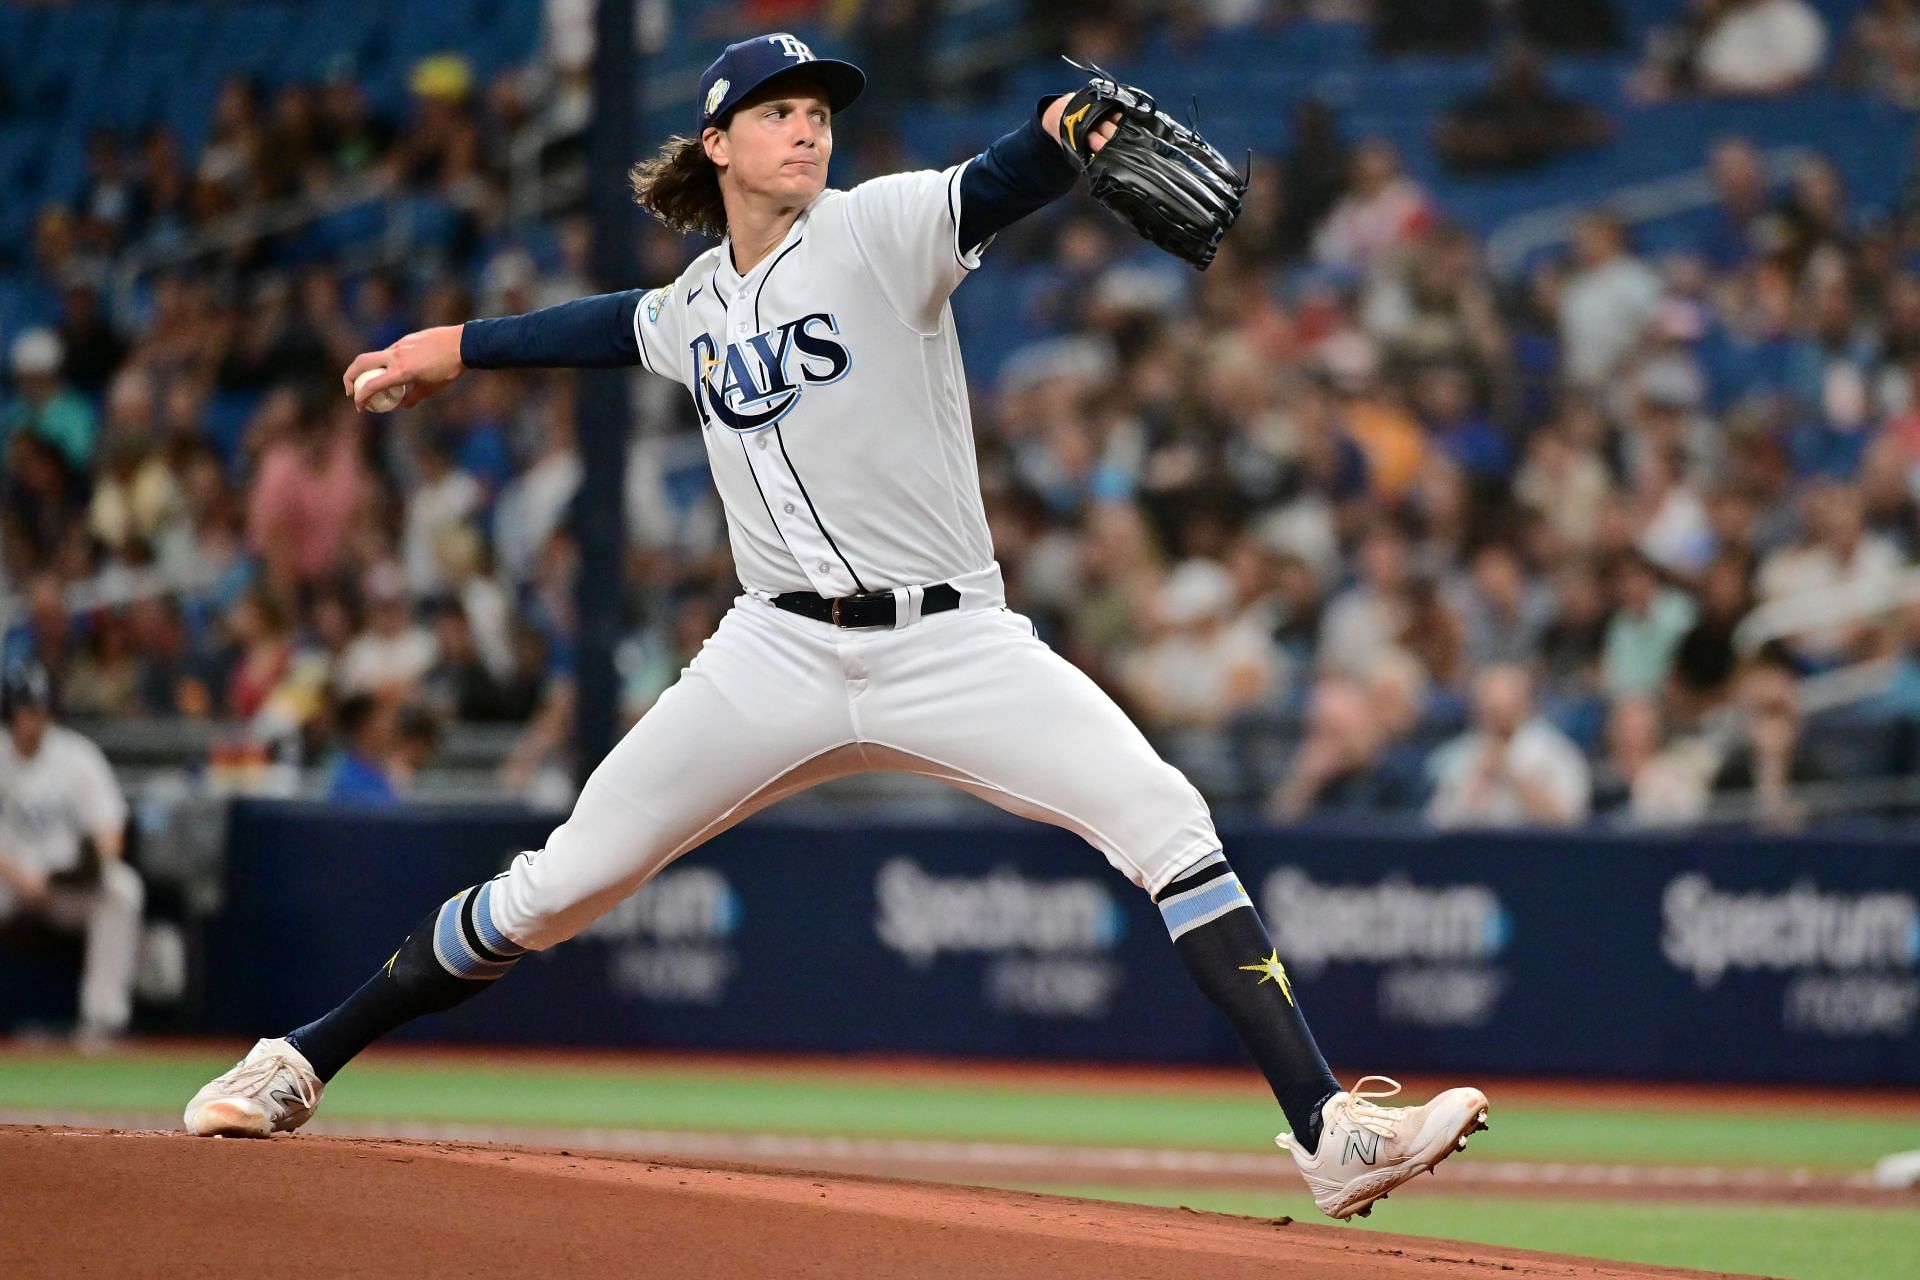 Cillian Murphy Reacts To His 'Doppelgänger', A Tampa Bay Rays Pitcher